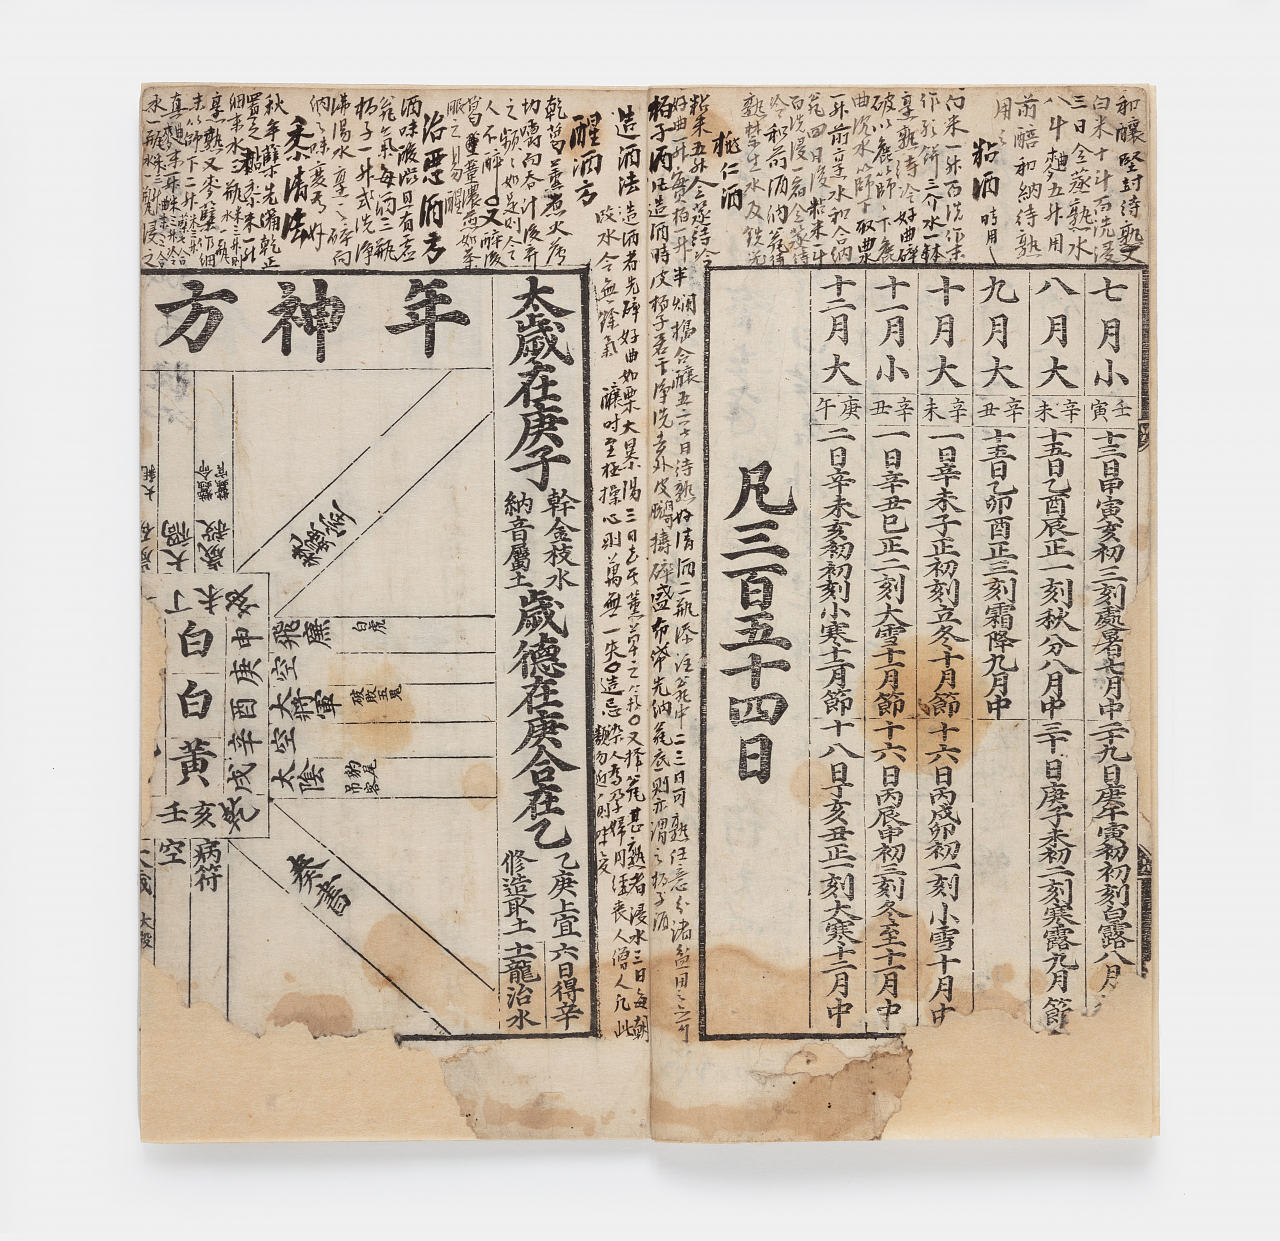 Calendrical book of Gyeongja Year (1600) with memoranda by Joseon civil official Ryu Seong-ryong, purchased from a Japanese individual, on Sept. 8. (OKCHF)